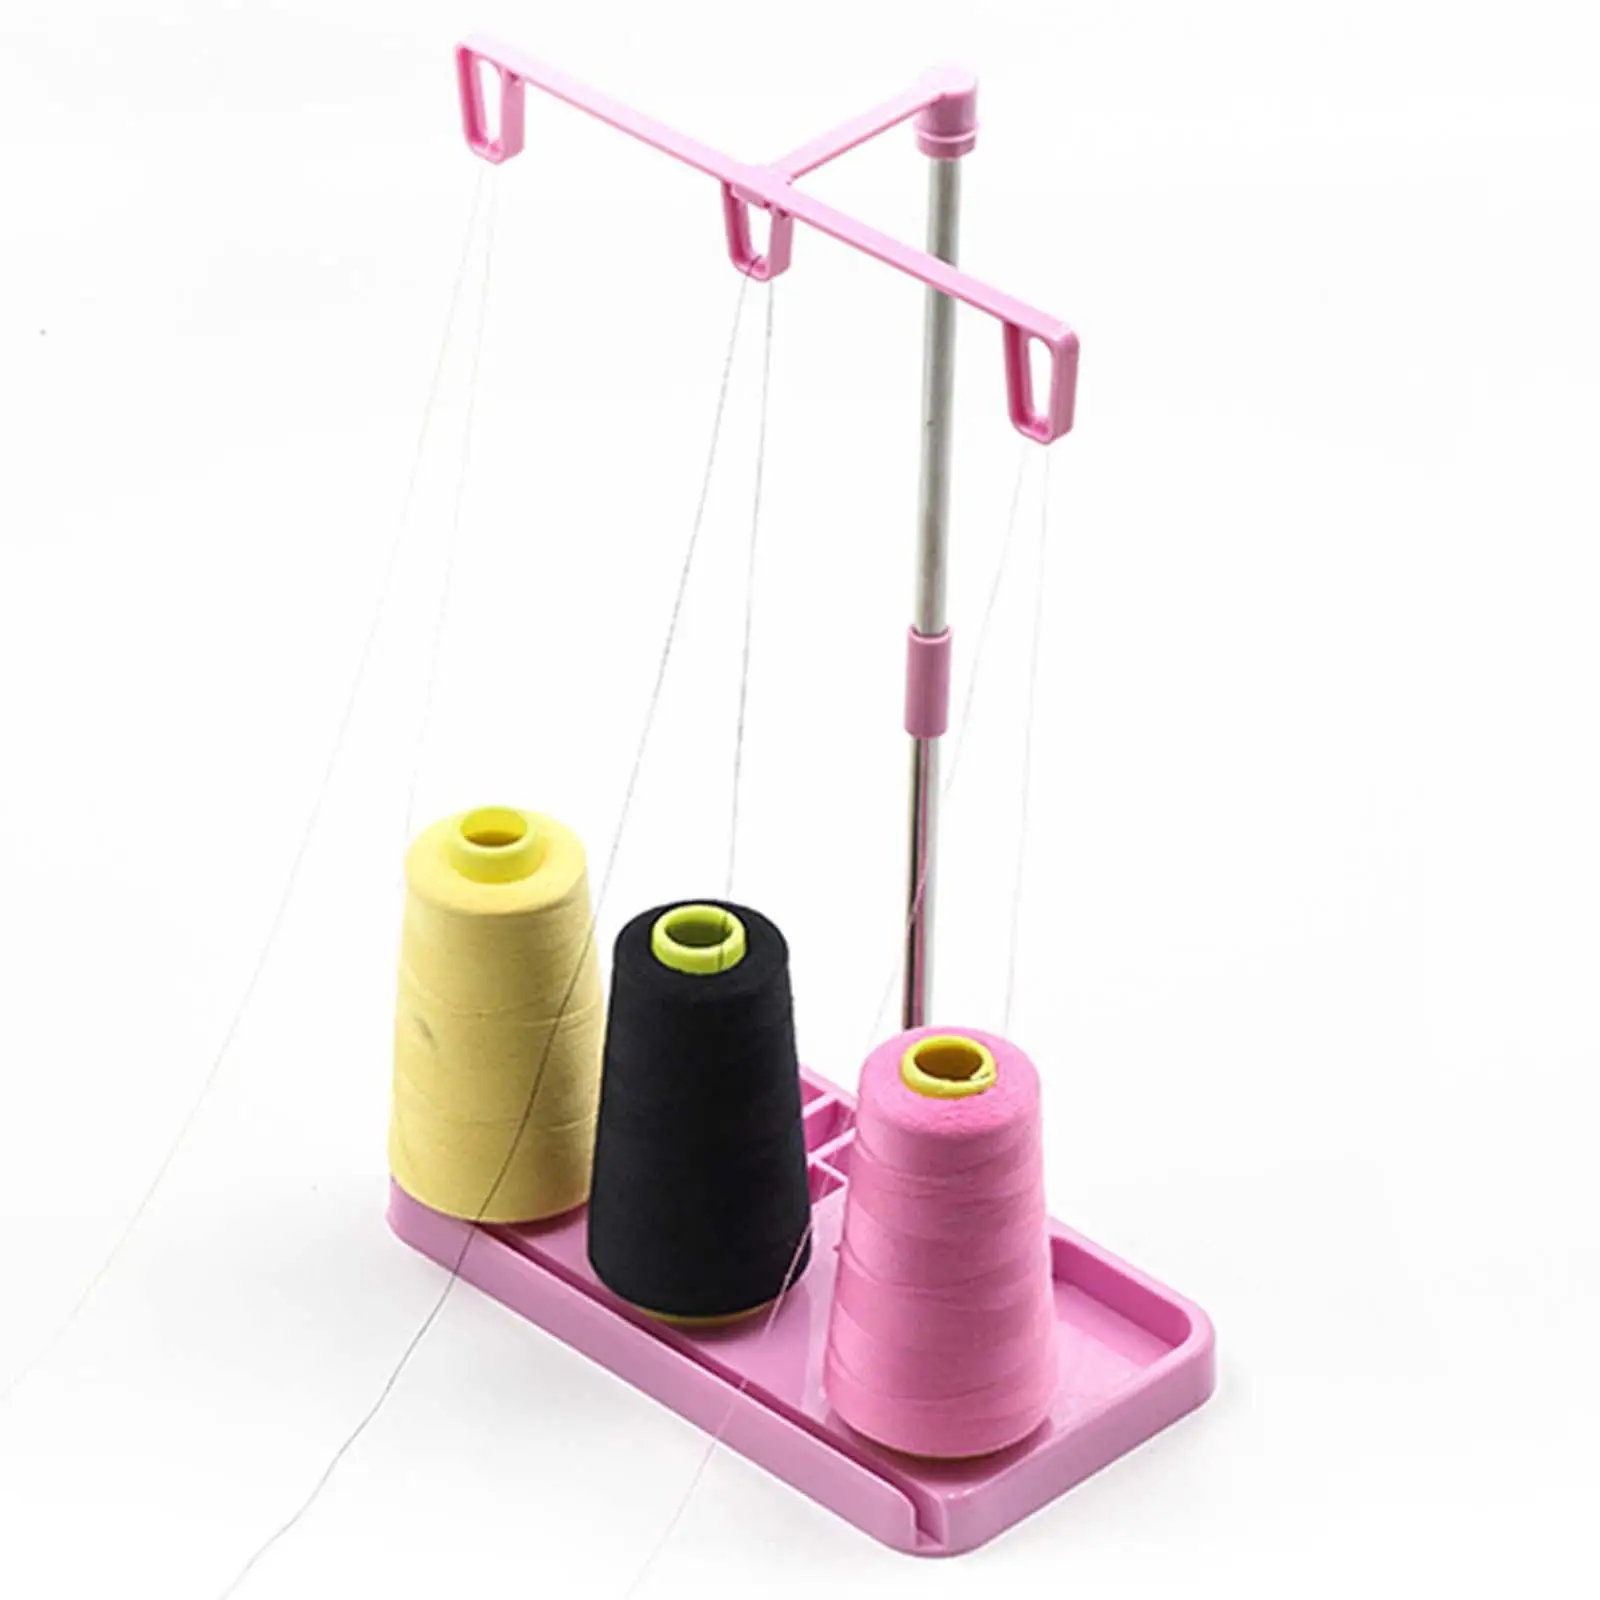 3 Cone Spools Holder Thread Stand Cone Thread Holder Portable Thread Rack  for Embroidery Sewing Machines Tailor Sewing Tool - AliExpress